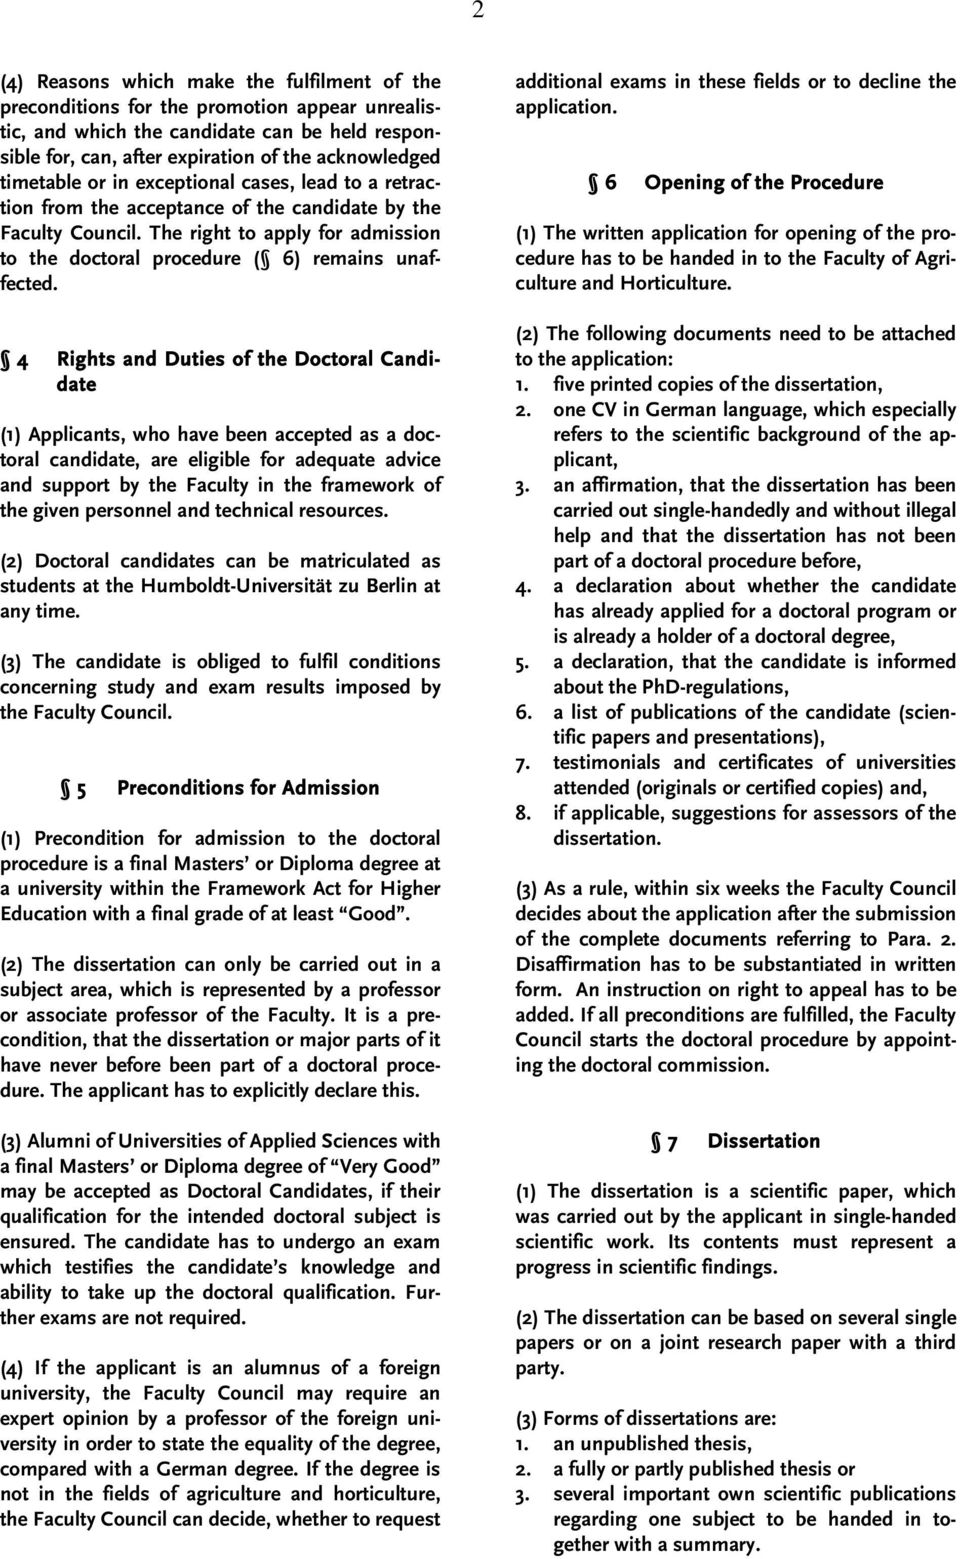 4 Rights and Duties of the Doctoral Candidate (1) Applicants, who have been accepted as a doctoral candidate, are eligible for adequate advice and support by the Faculty in the framework of the given